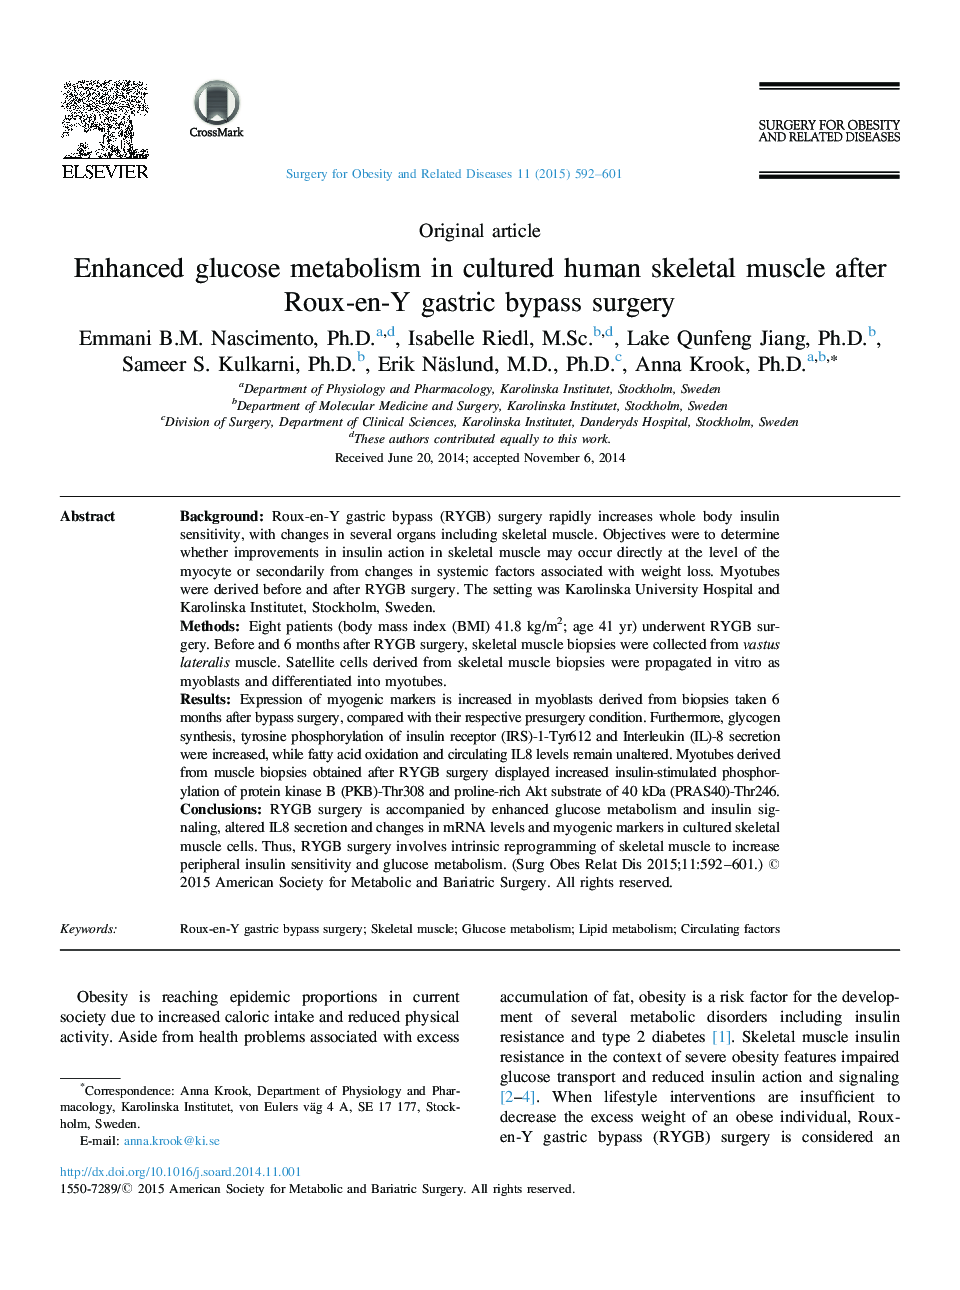 Enhanced glucose metabolism in cultured human skeletal muscle after Roux-en-Y gastric bypass surgery